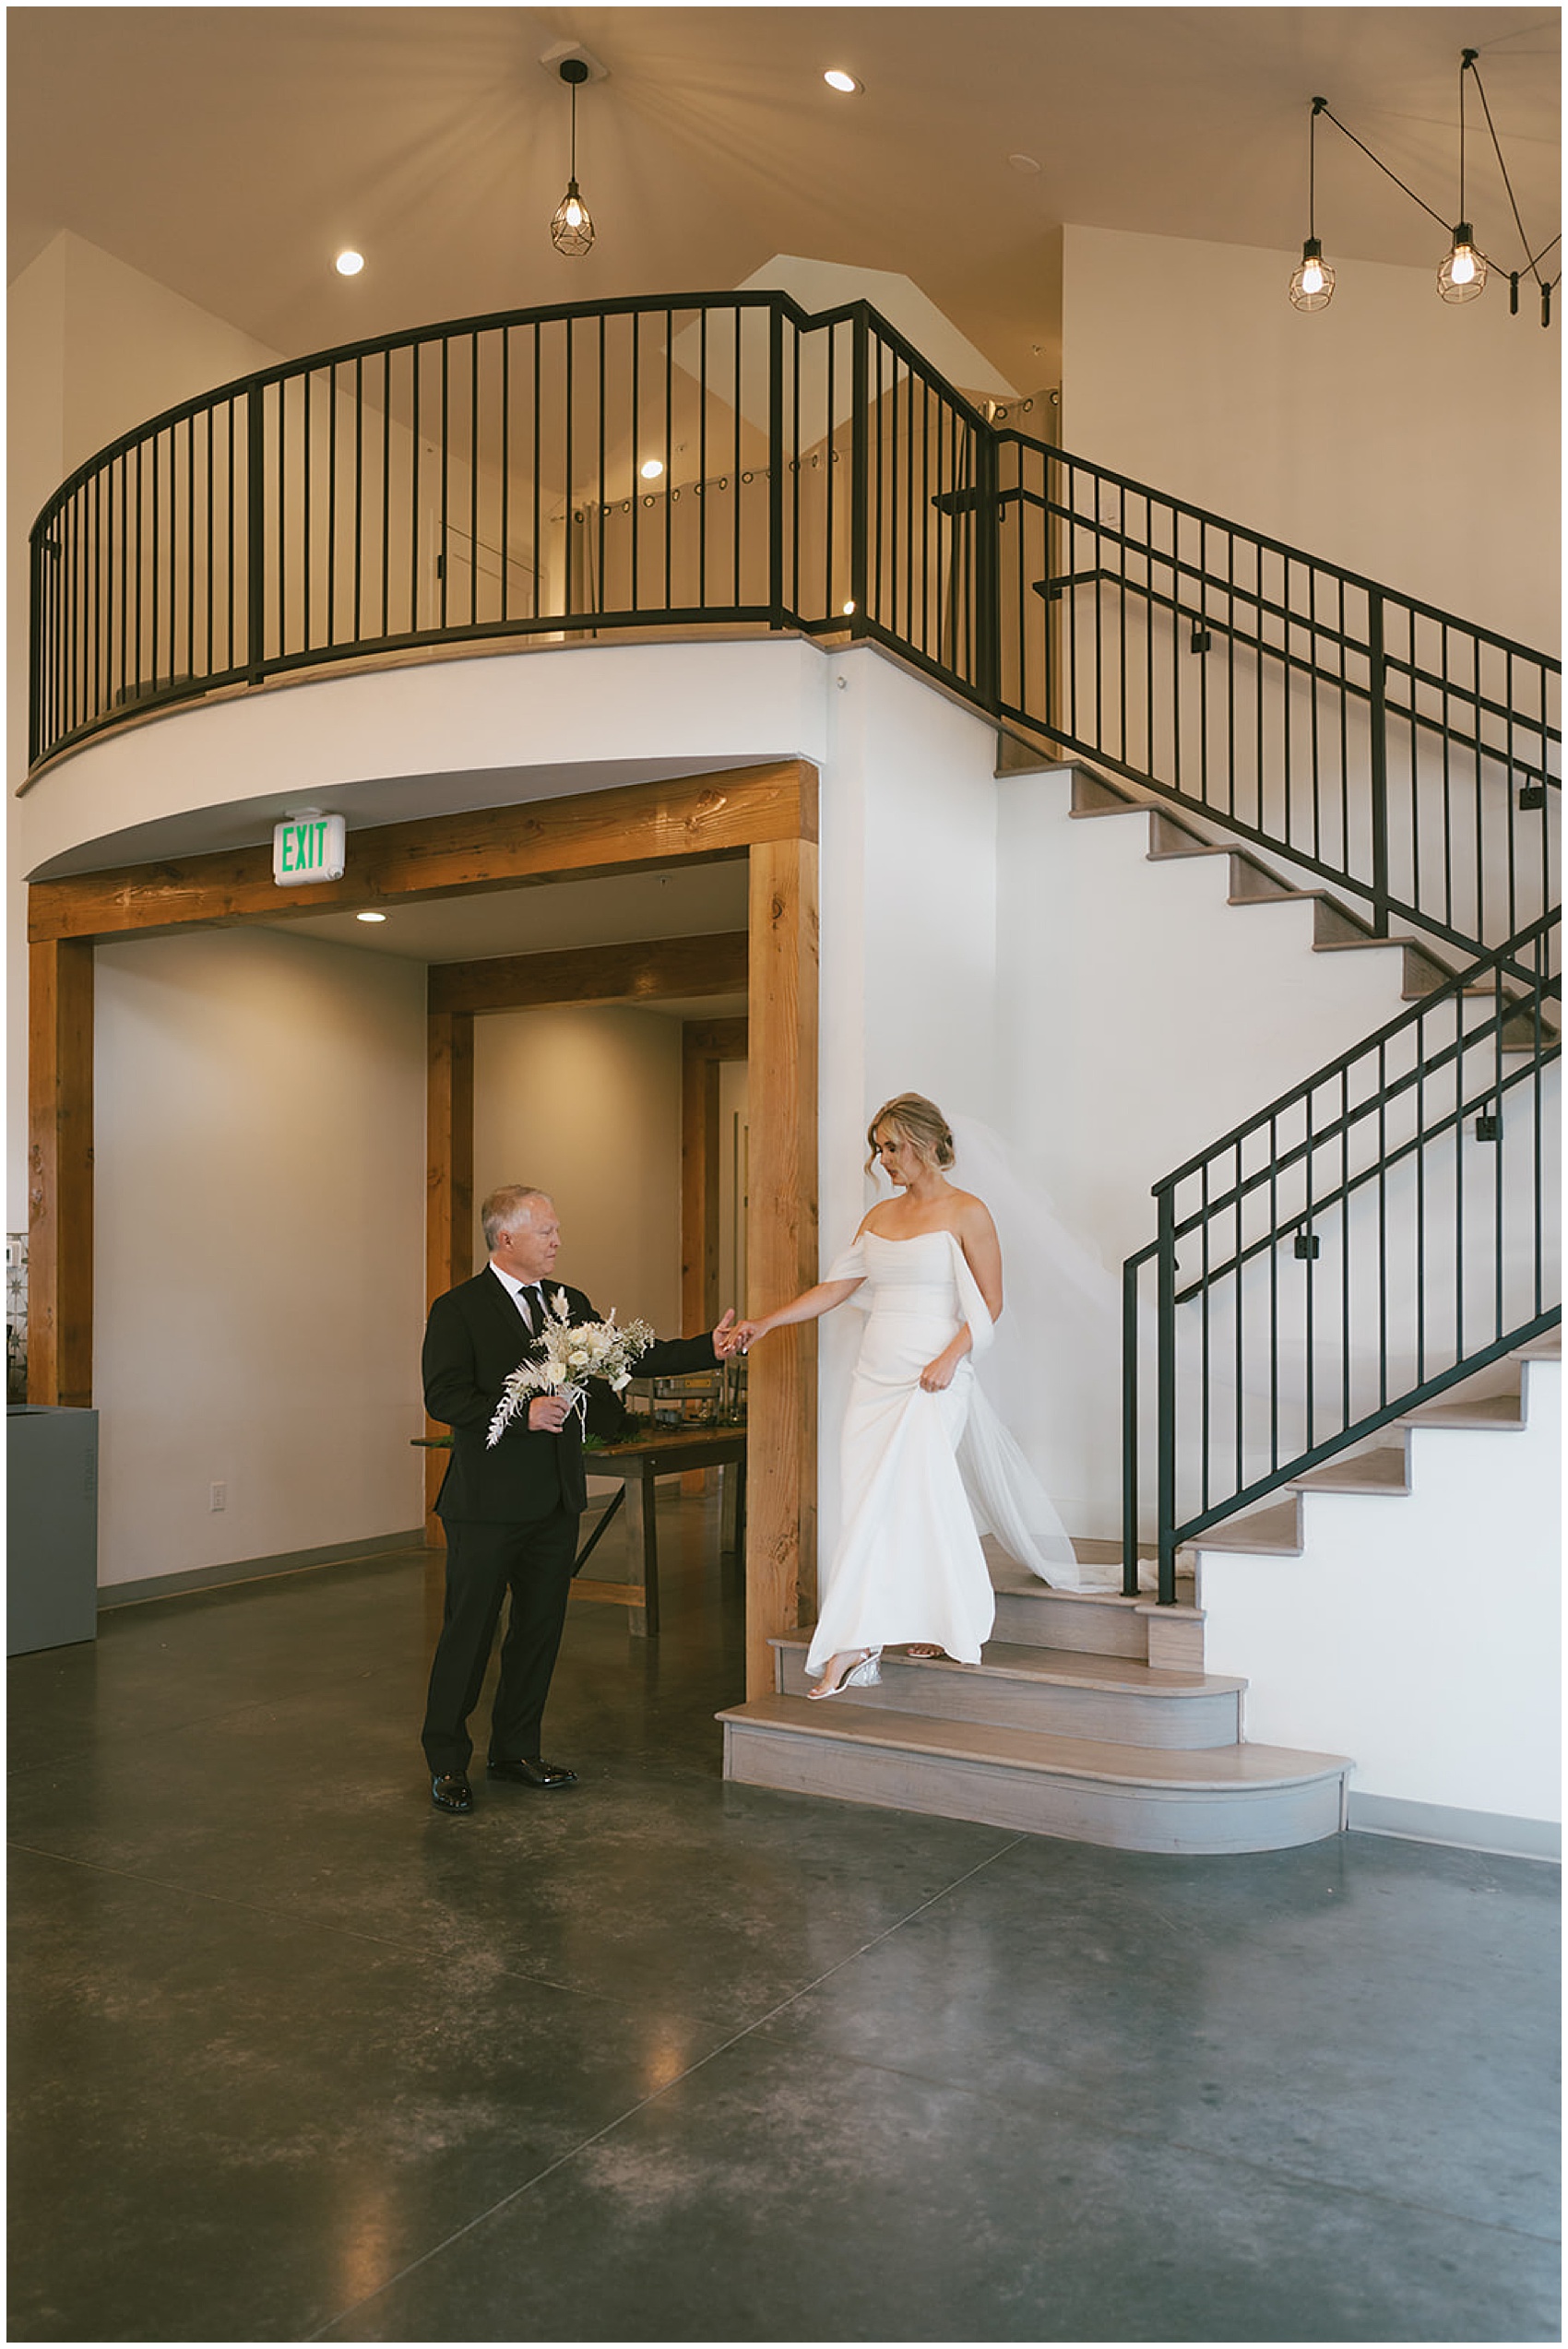 A father walks his daughter down the stairs of the north star gatherings wedding venue for her ceremony